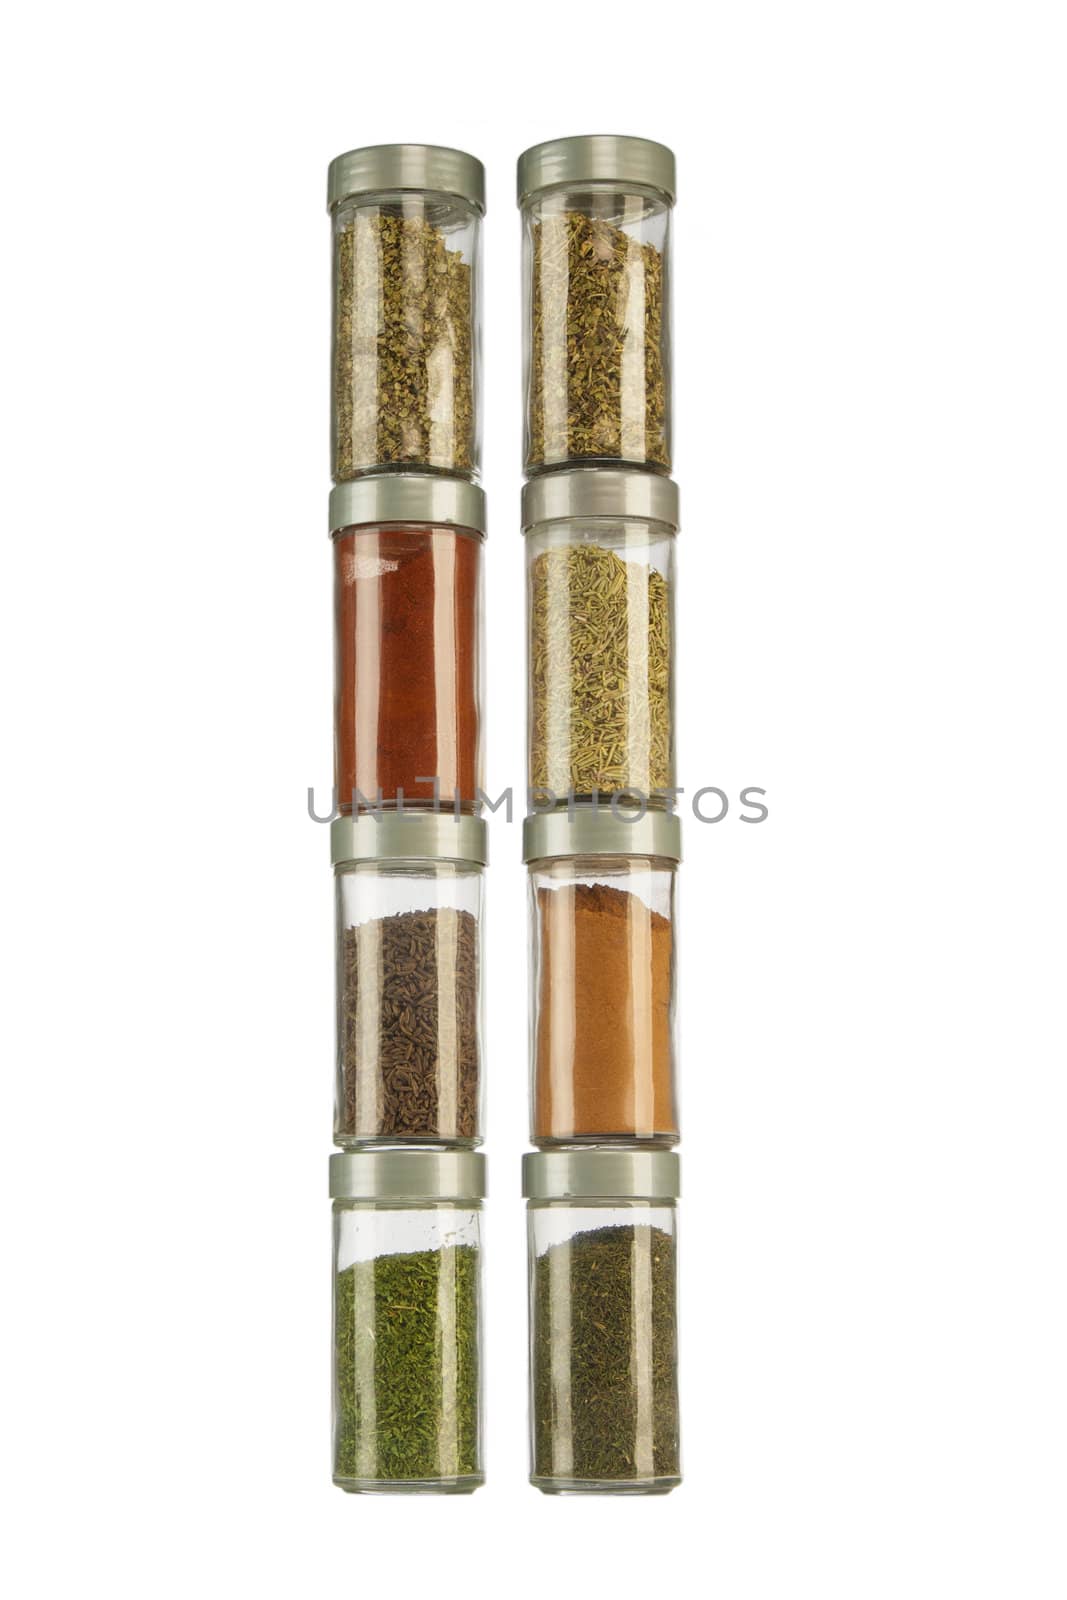 colorful powder spices in glass bottle by VictorO